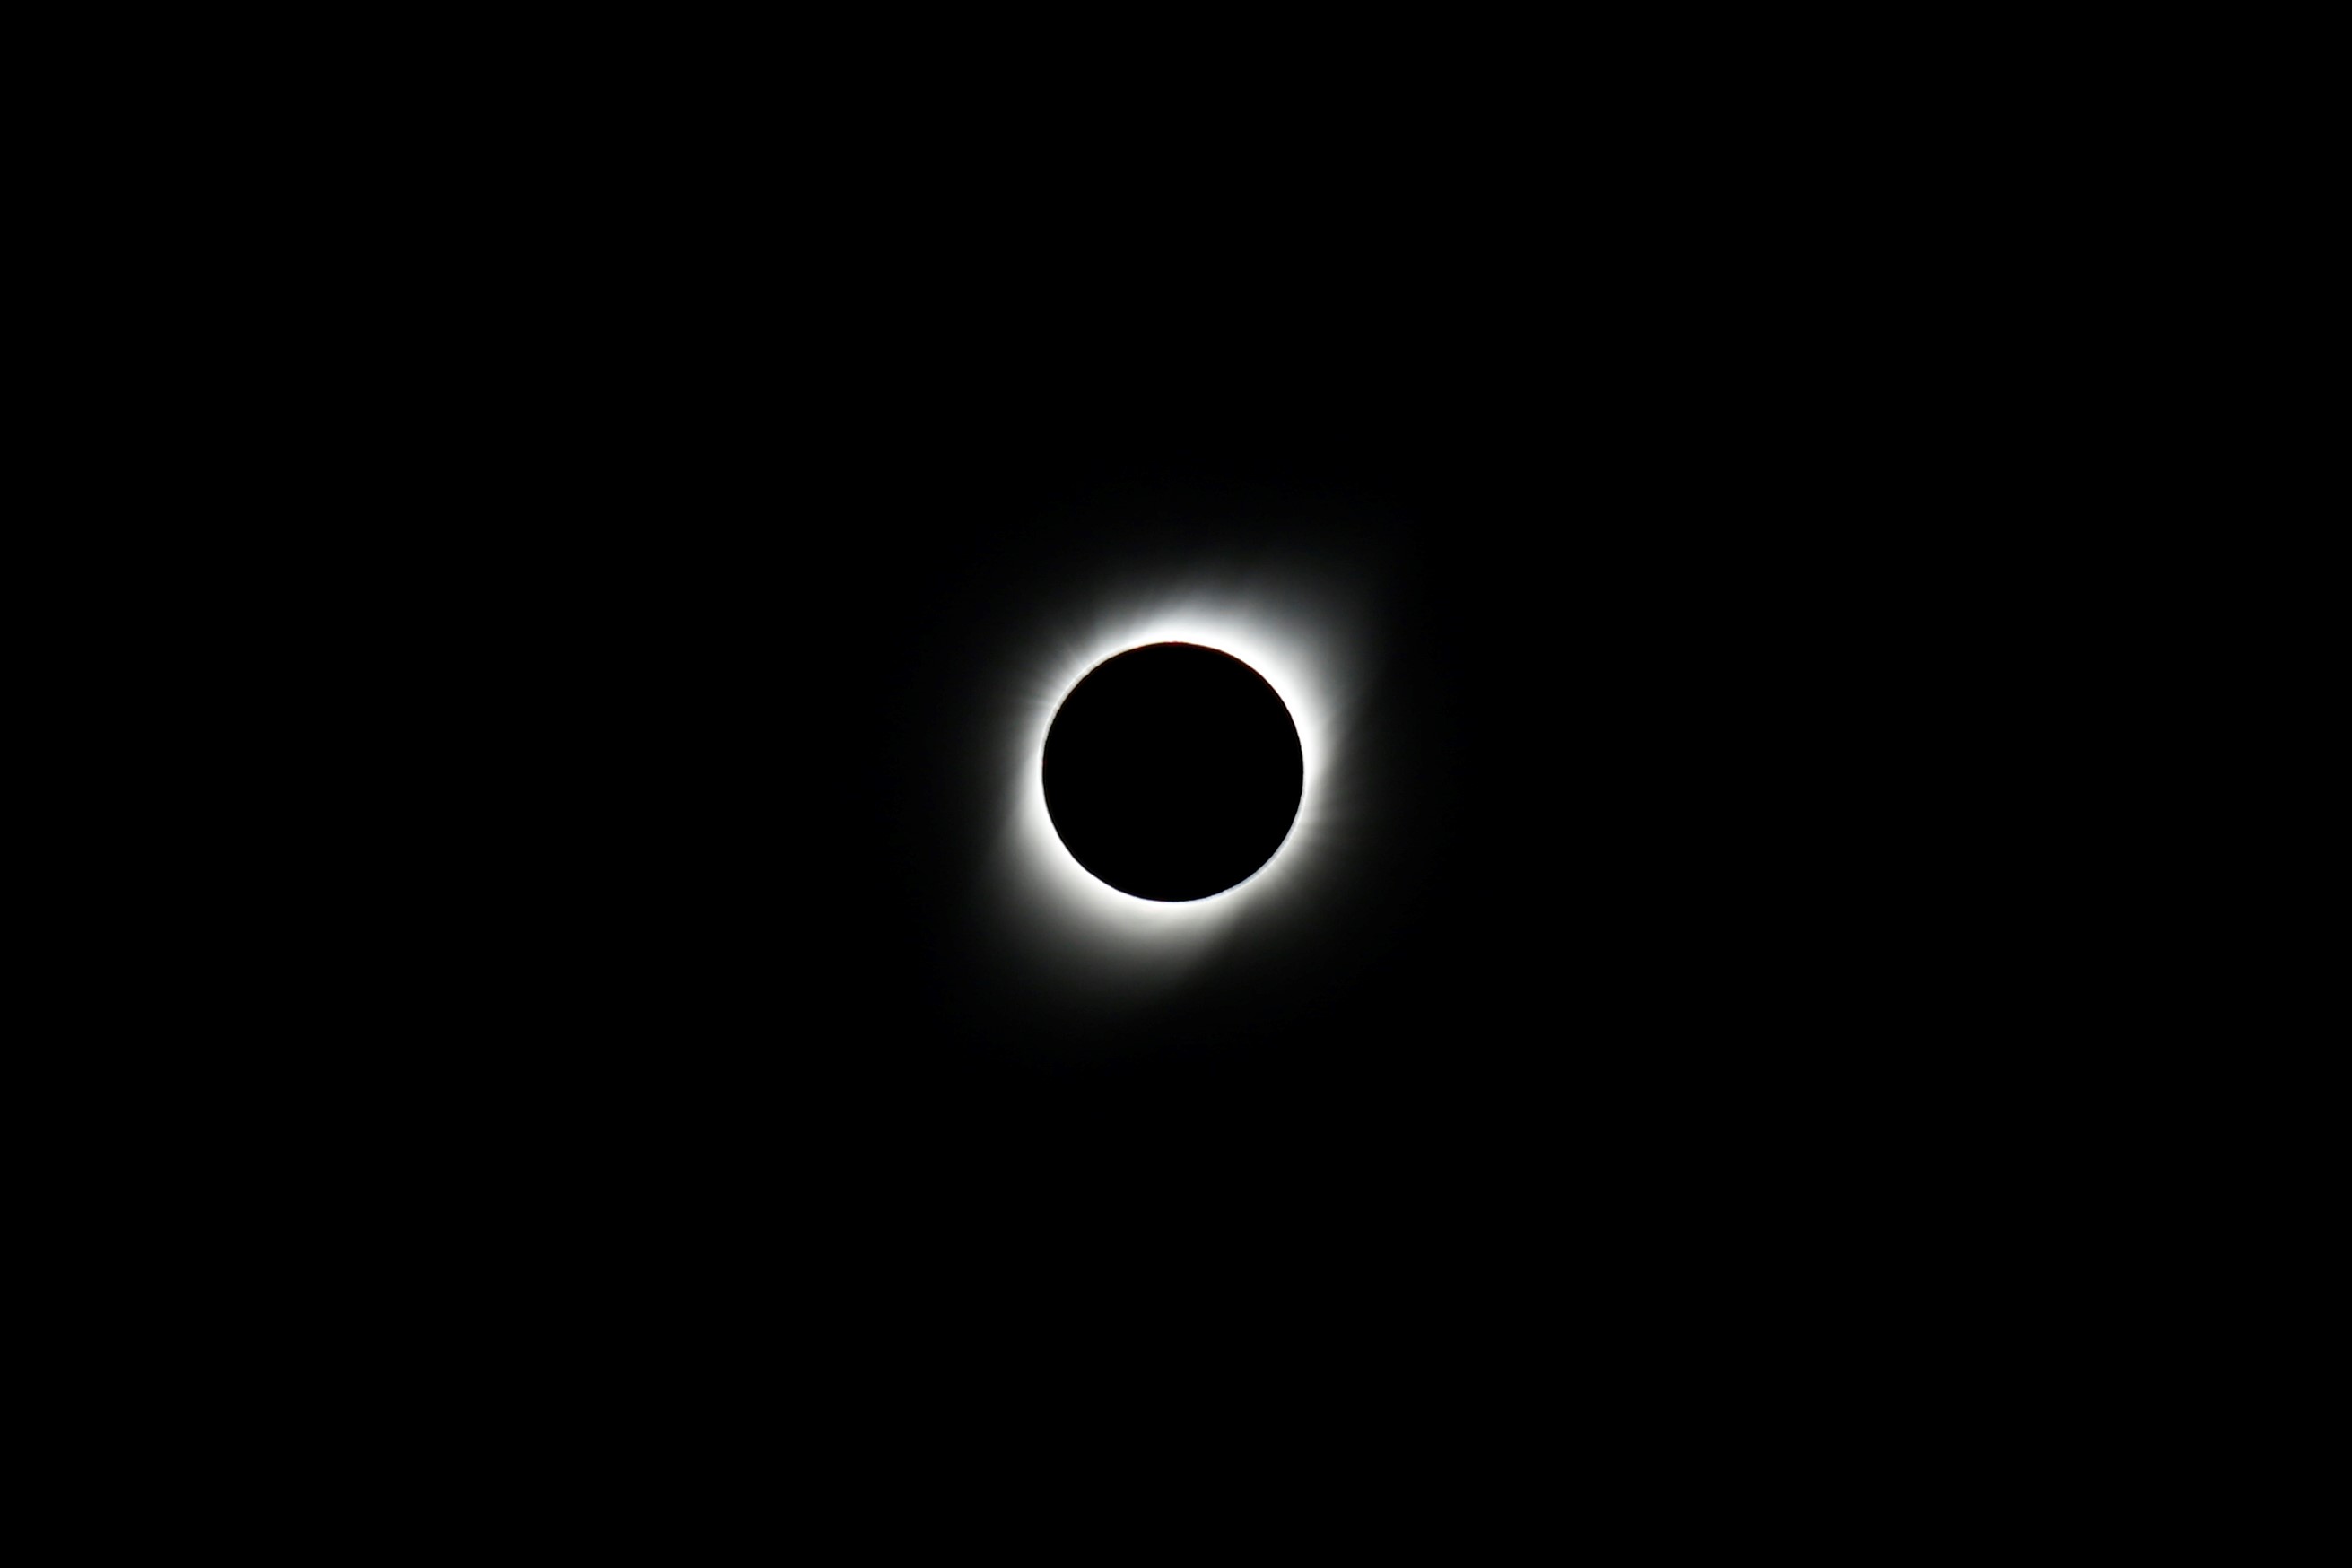 The sun, a black circle obscured by the moon and surrounded by a glowing white corona, hangs in a black sky.